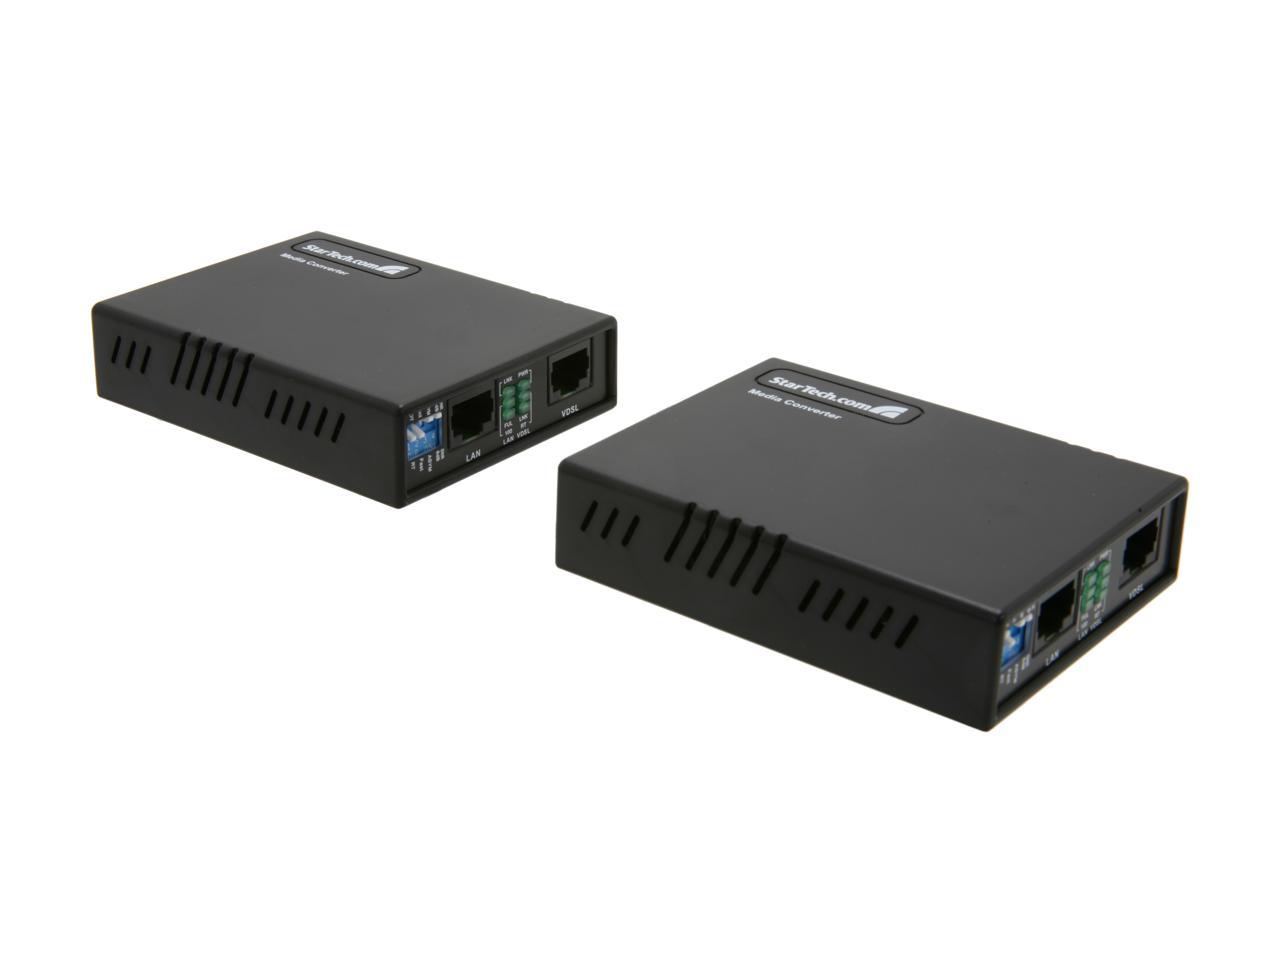 StarTech 10/100 VDSL2 Ethernet Extender Kit over Single Pair Wire - Extend your 10/100Mbps network by up to 1km over Ethernet or RJ11 phone lines - ethernet extender - lan extender - ethernet over phone -network extender -short haul modem